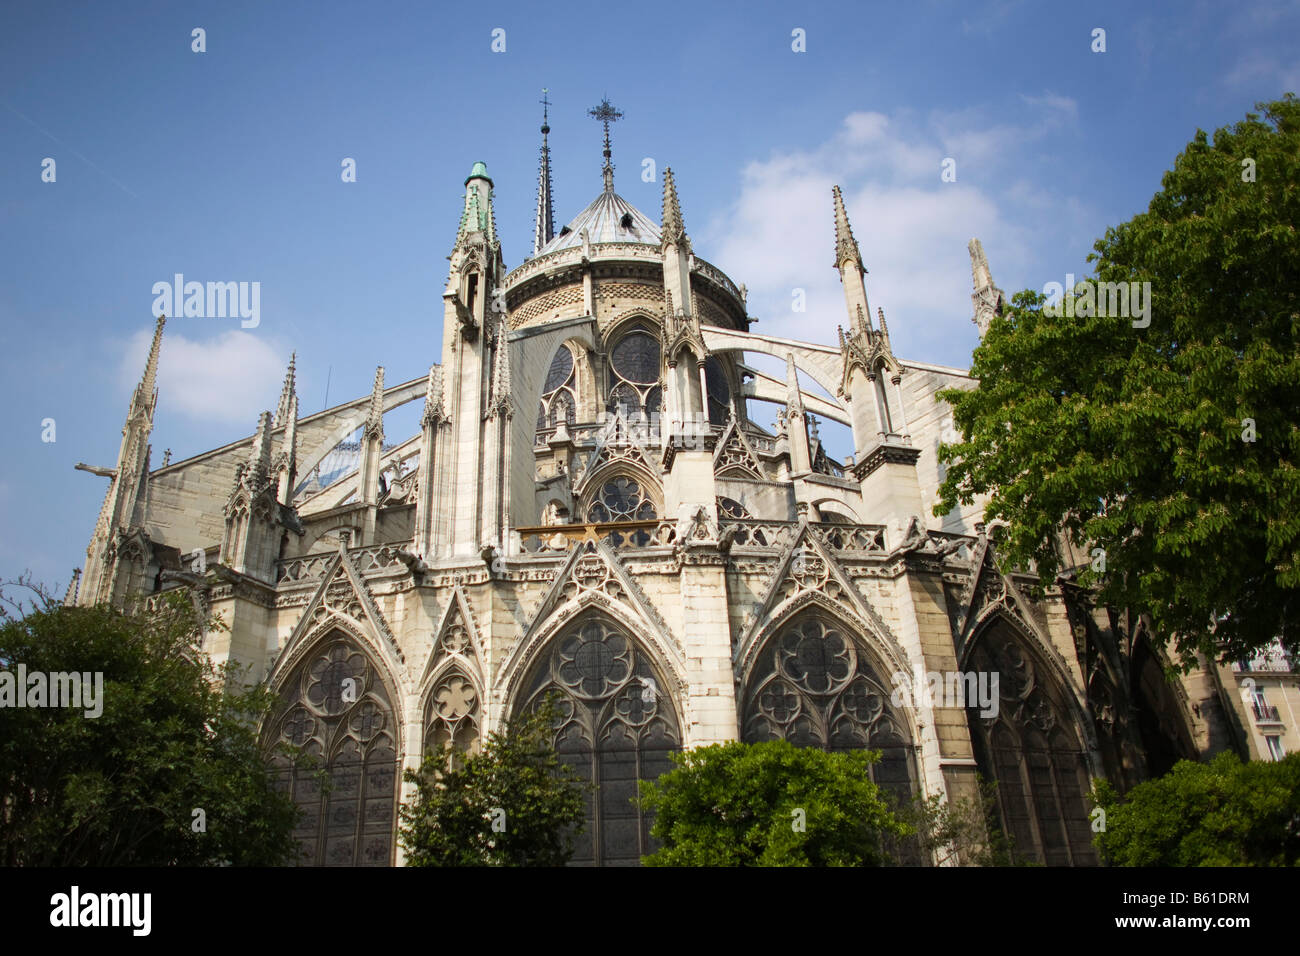 Jean Ravy High Resolution Stock Photography and Images - Alamy